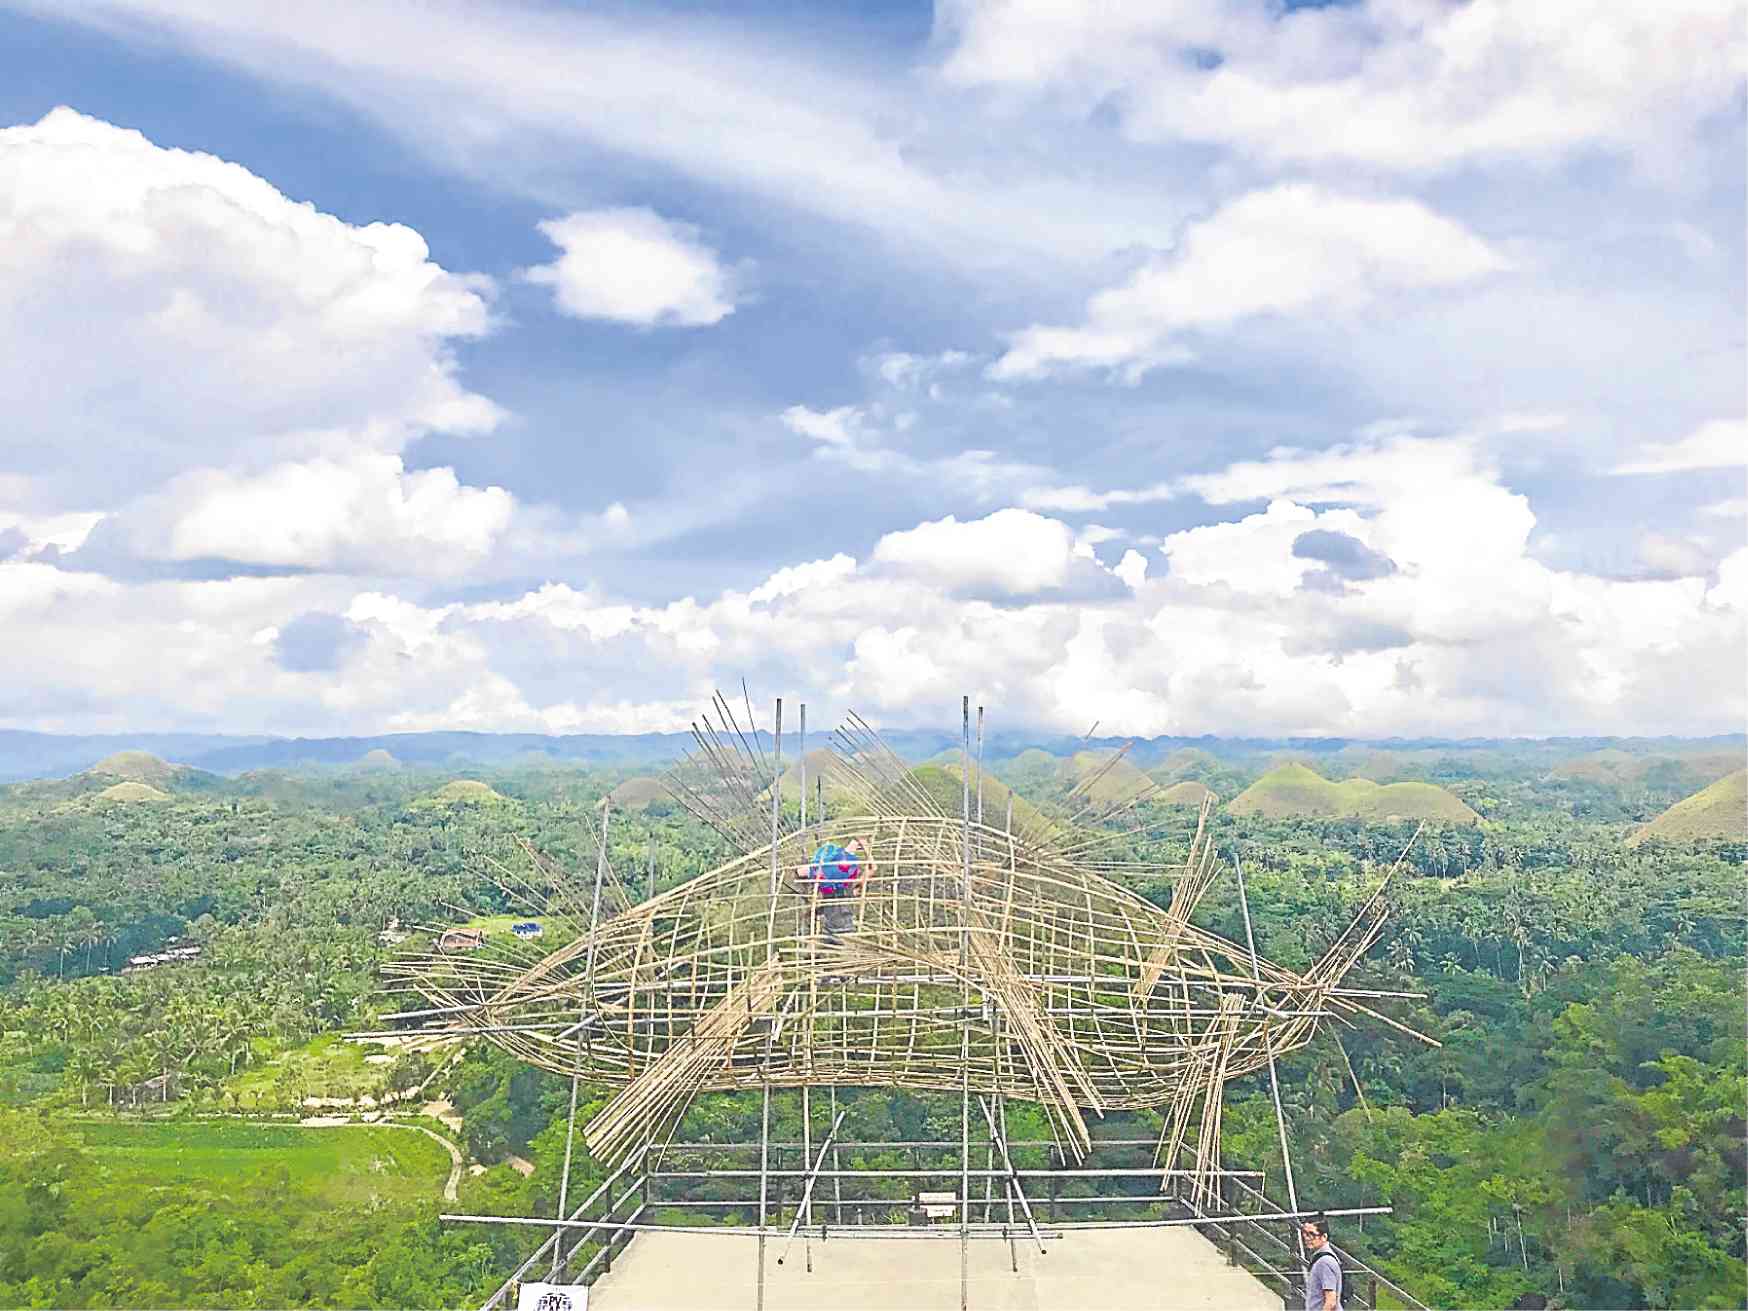 Leeroy New’s “Kugtong,” an art installation at the viewing deck of the famous Chocolate Hills in Bohol